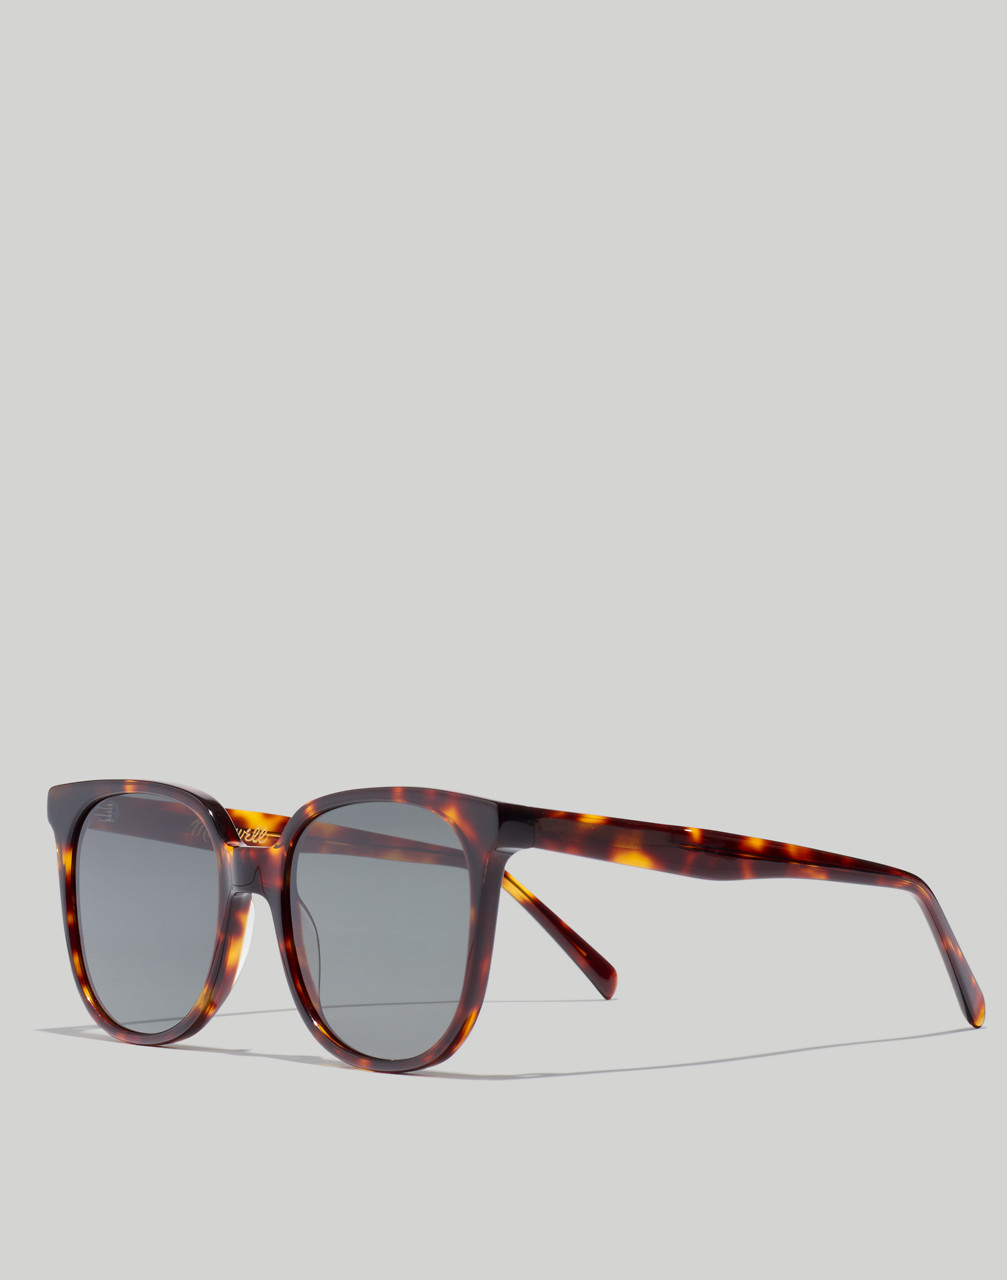 Mw Holwood Sunglasses In Sepia Tort